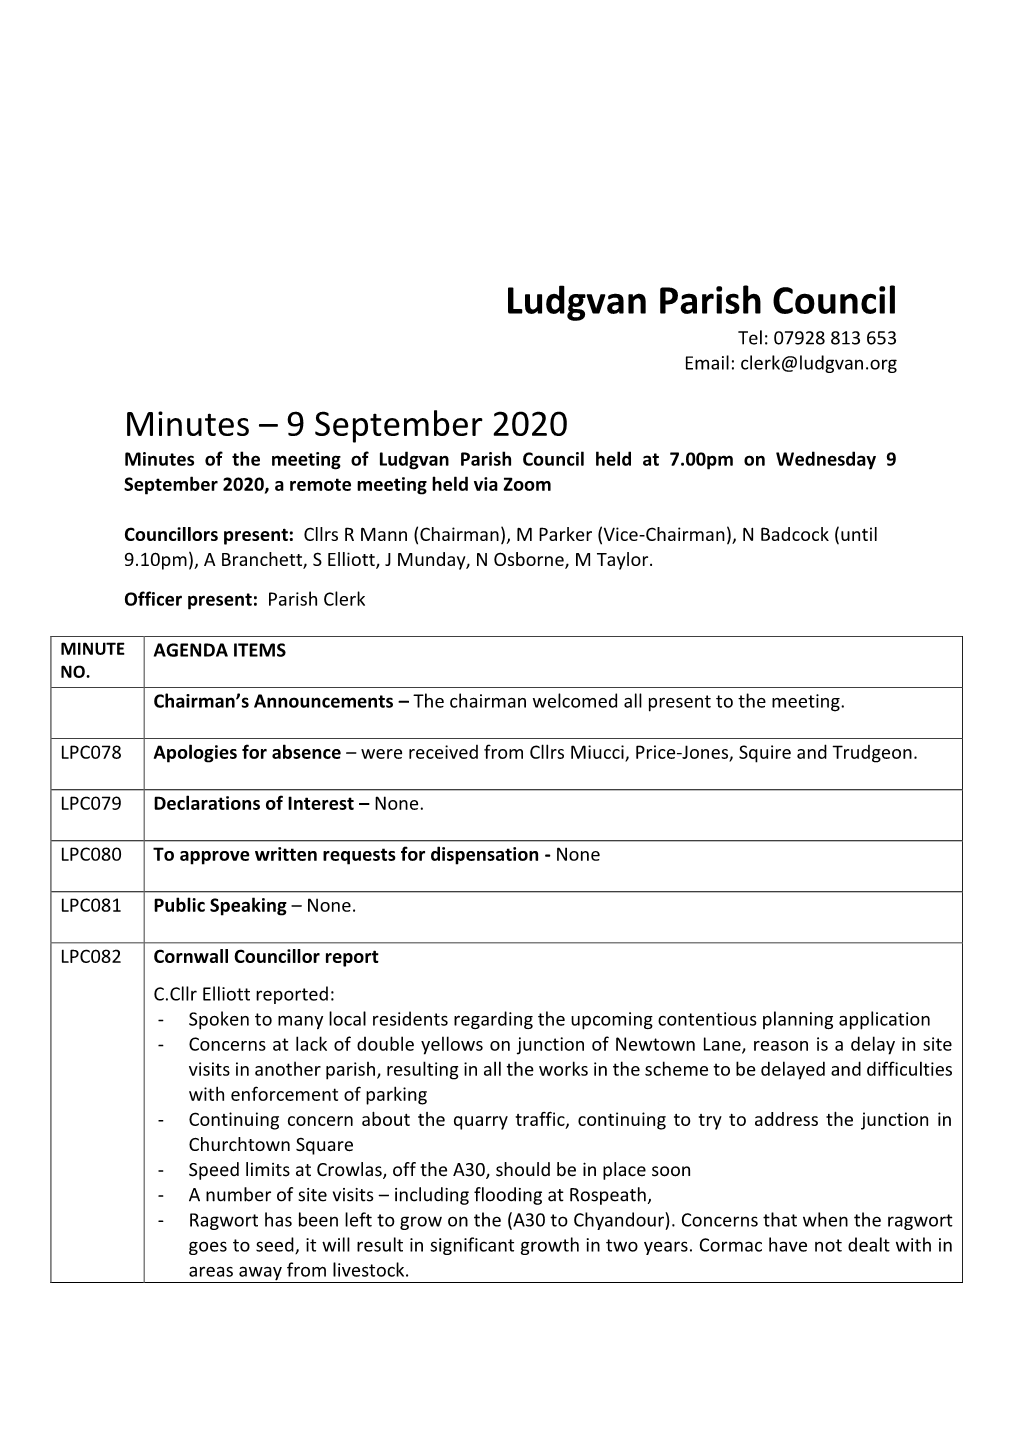 9 September 2020 Minutes of the Meeting of Ludgvan Parish Council Held at 7.00Pm on Wednesday 9 September 2020, a Remote Meeting Held Via Zoom